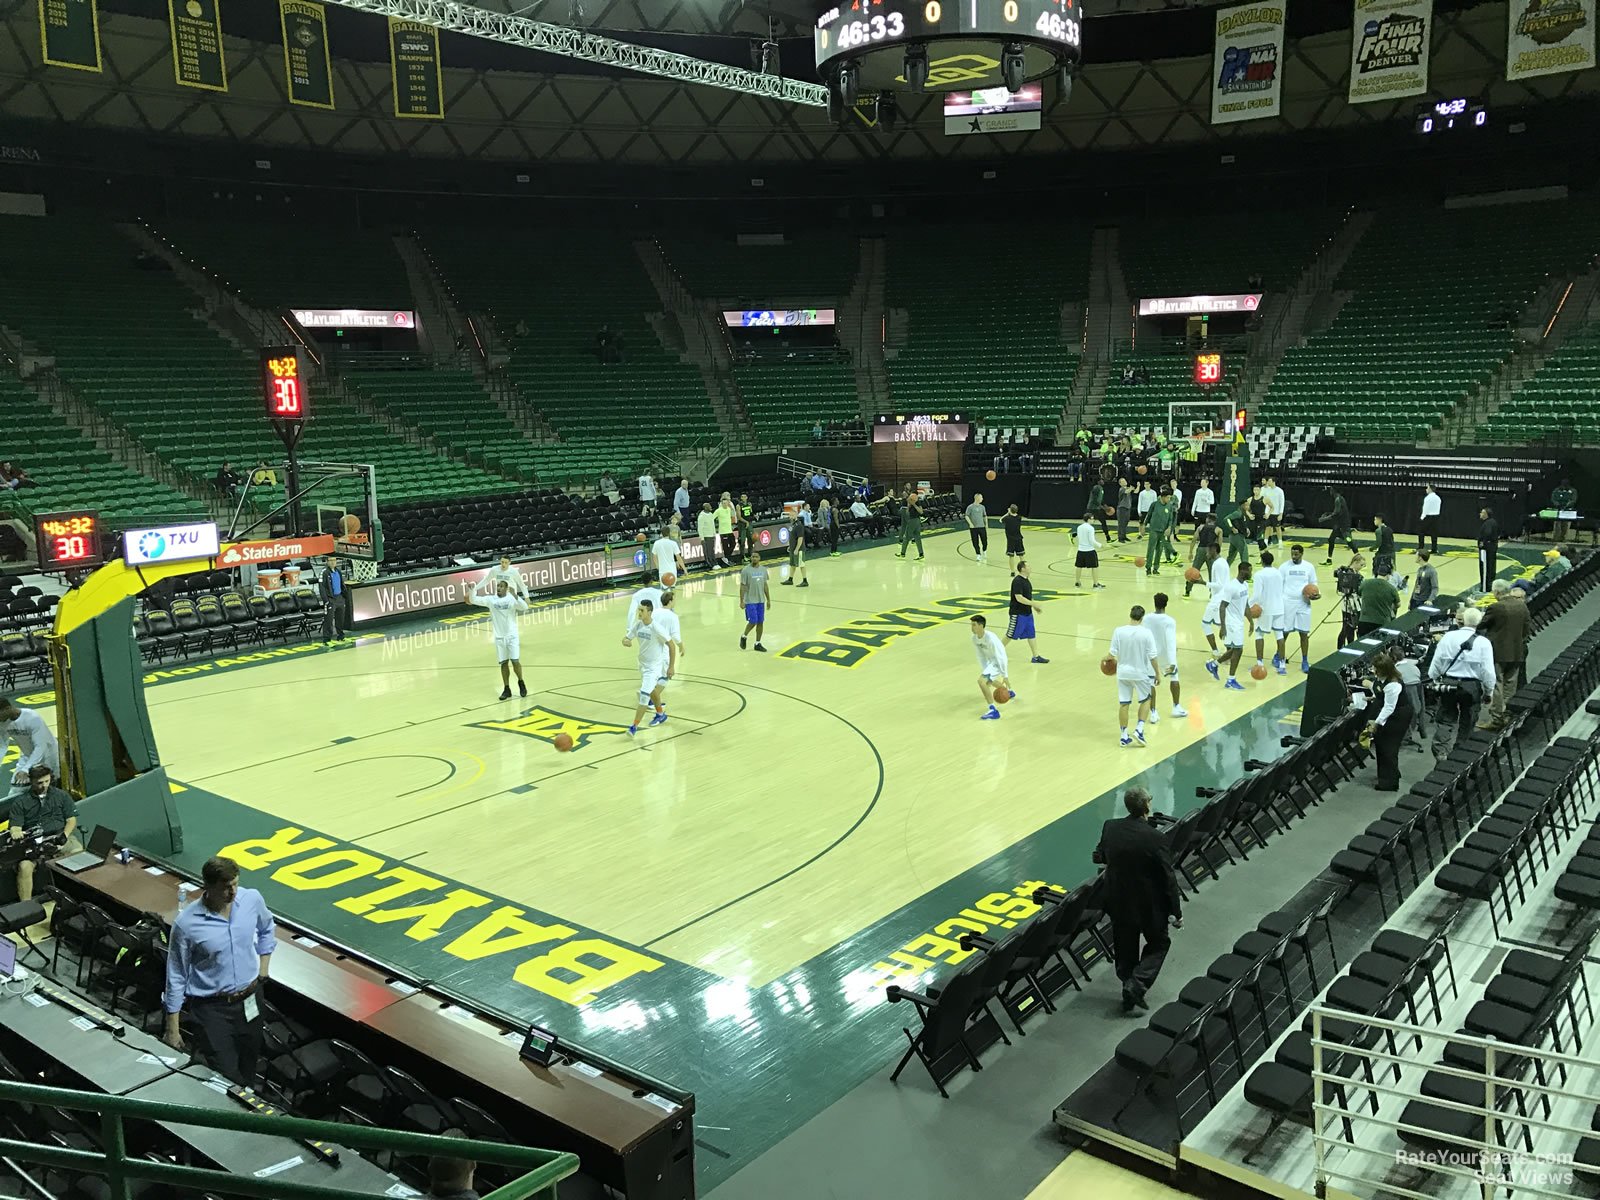 section 105, row 10 seat view  - ferrell center